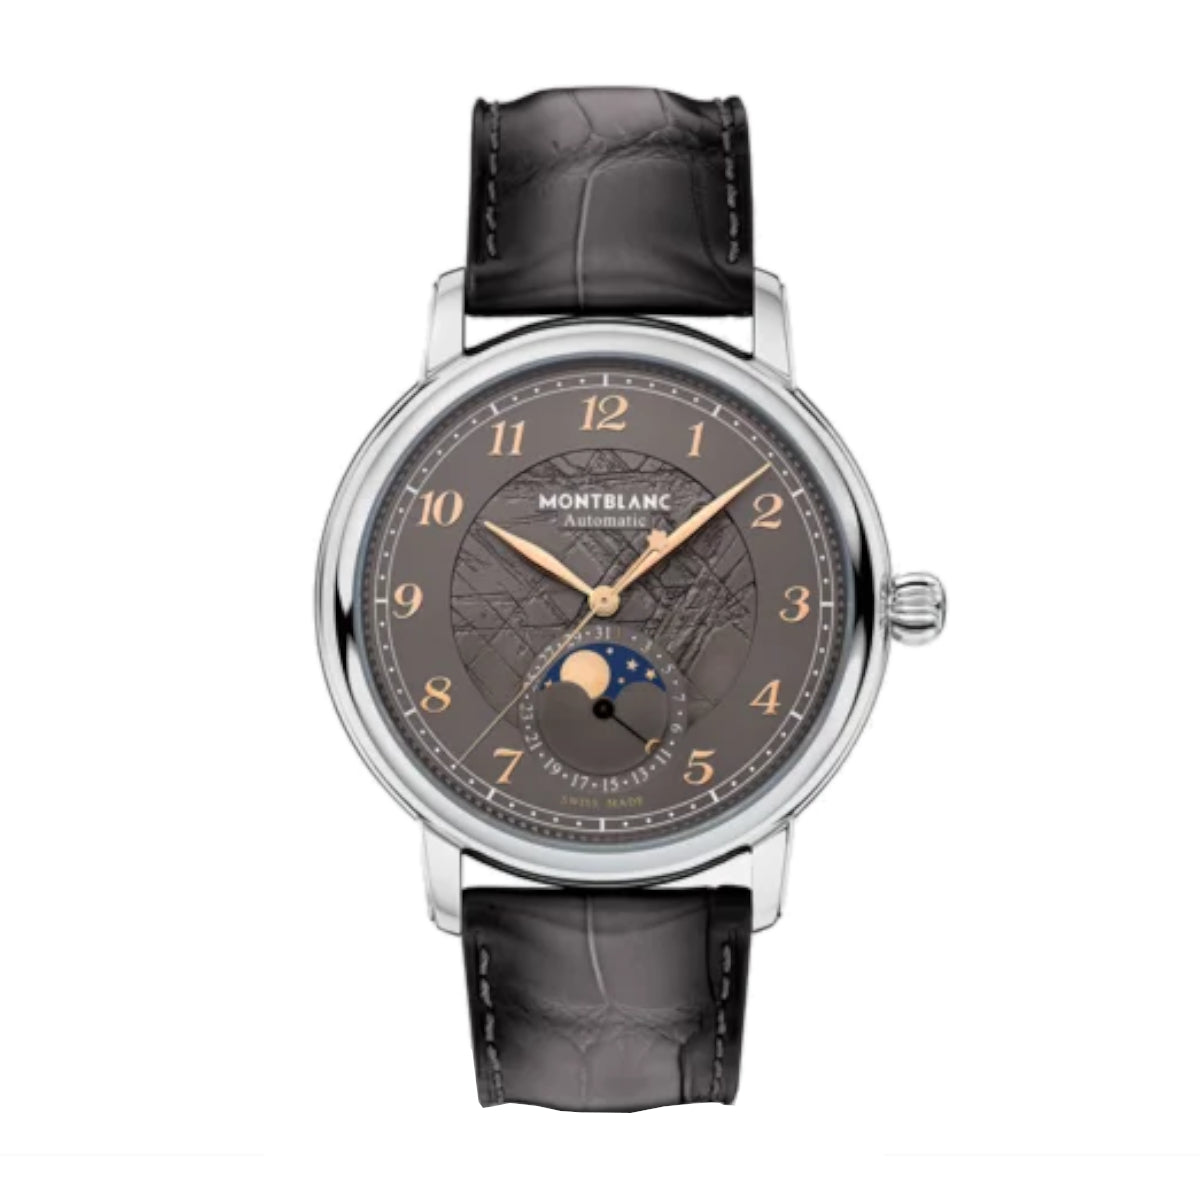 Montblanc Star Legacy Chronograph 42 mm Limited Edition - 1 786 pièces